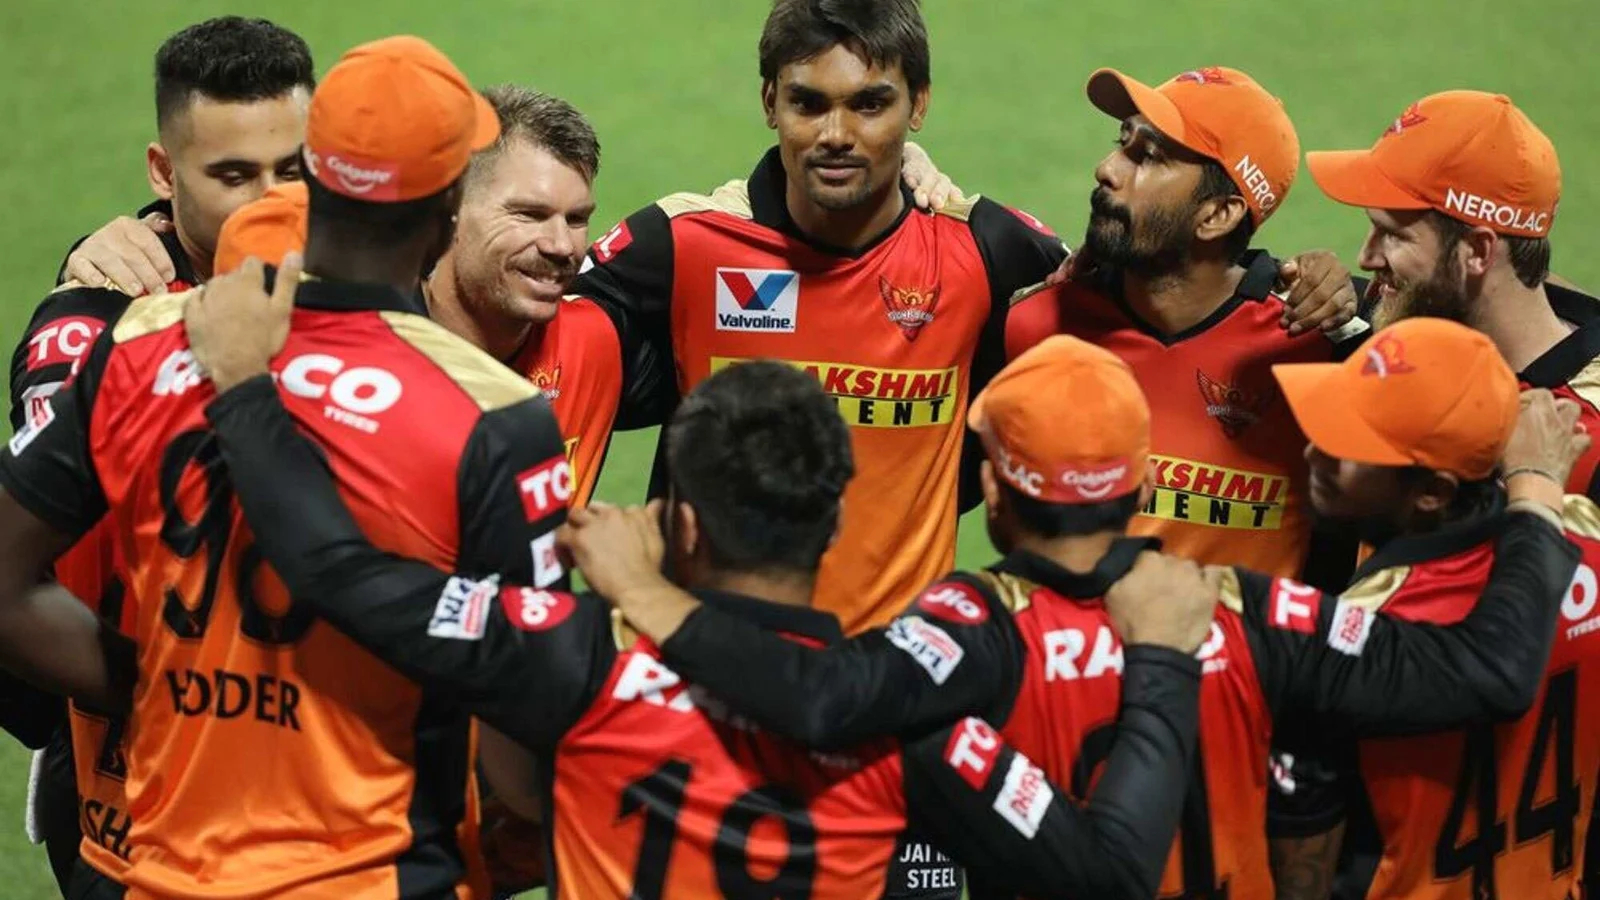 SRH has had one of their worst IPL seasons so far with one win from 9 matches in IPL 2021 | BCCI-IPL